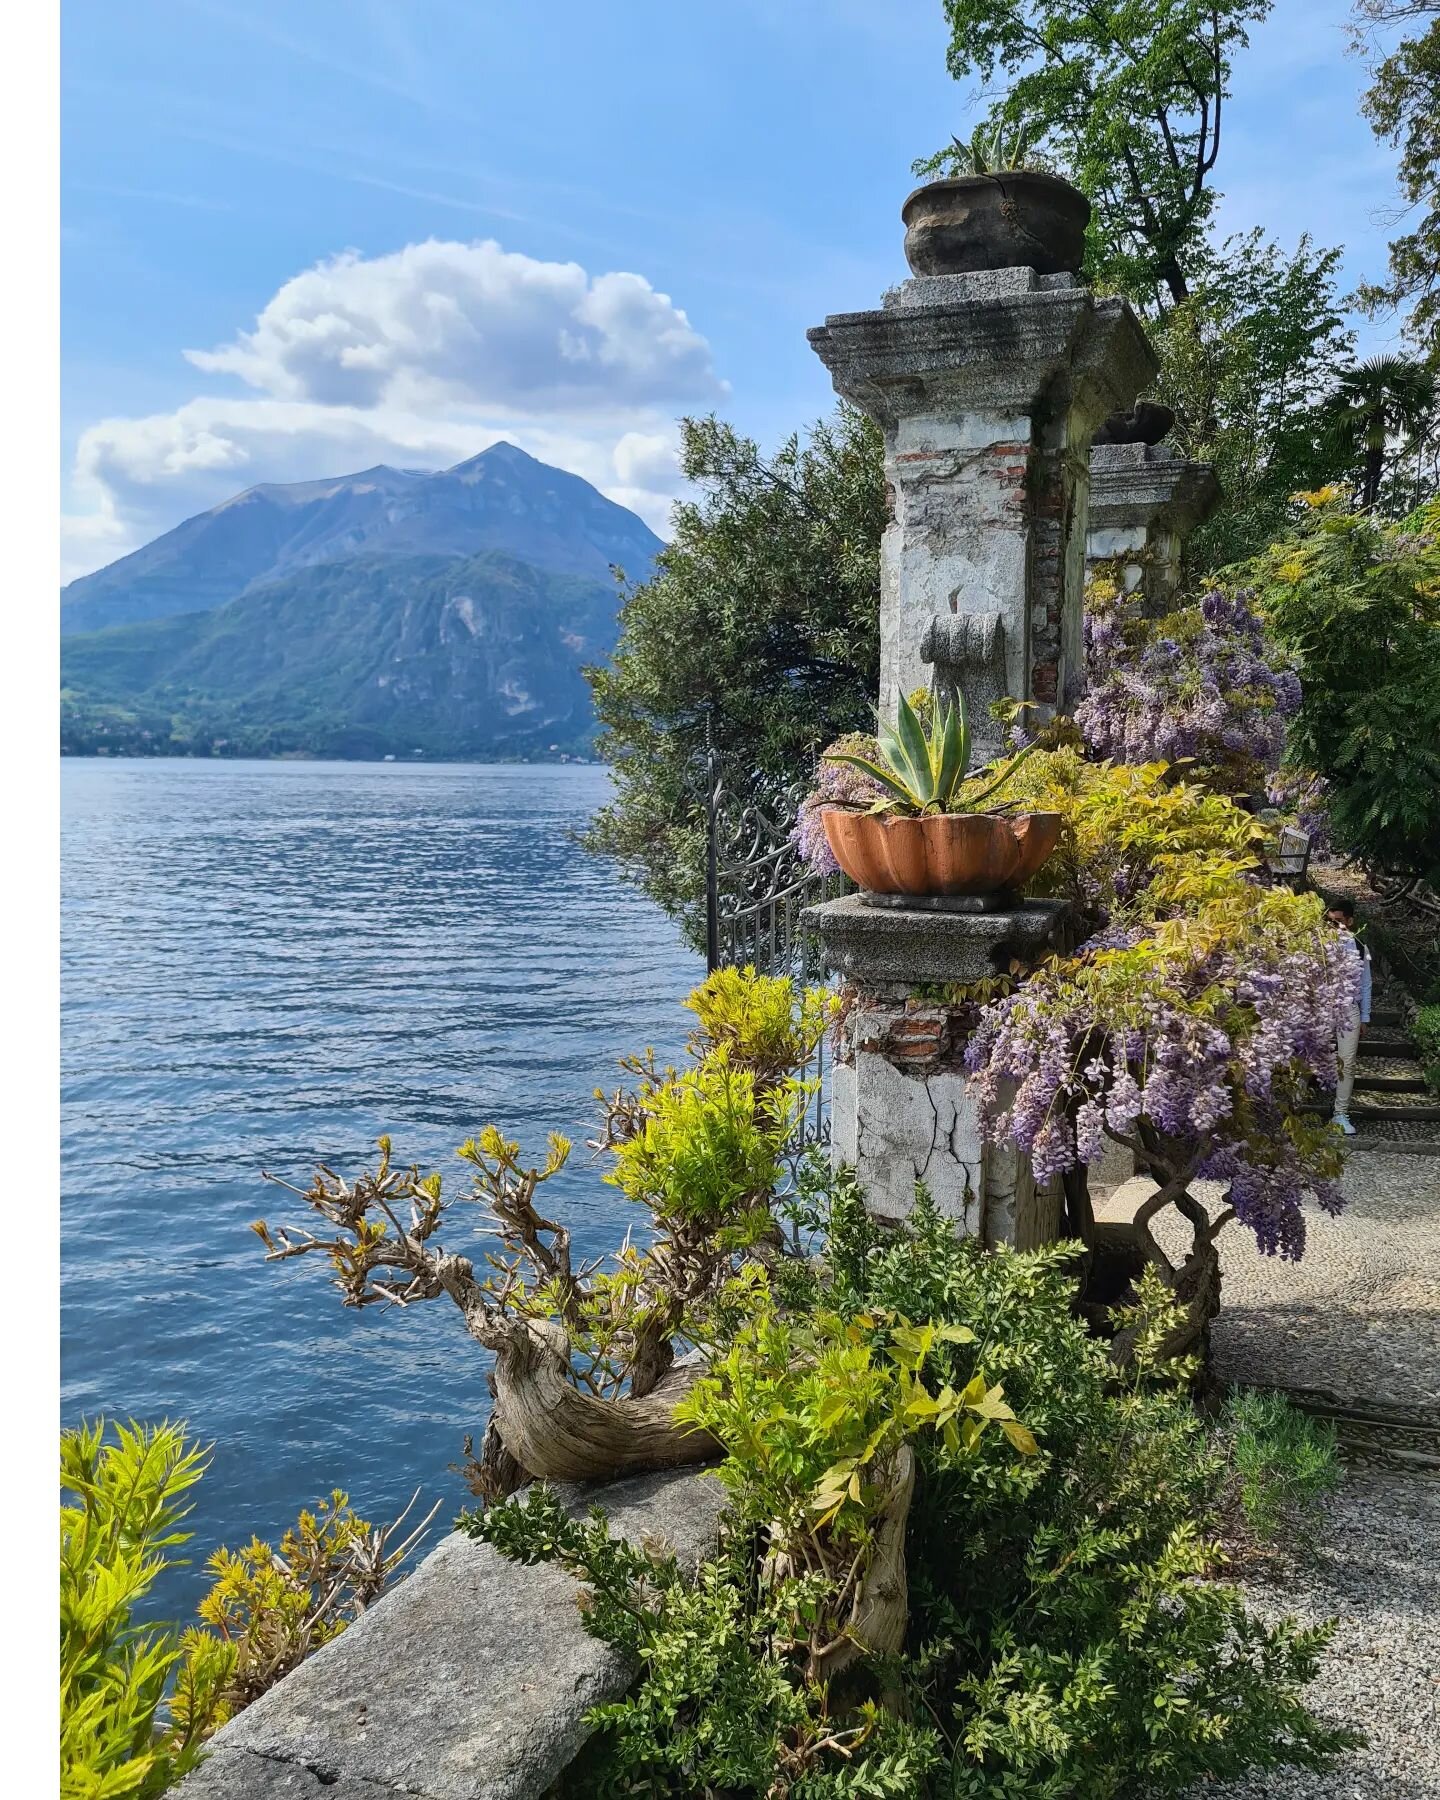 Looking out from the Botanical Gardens at Varenna, Lago di Como. I don't mind my composition on this photo! 📸
For 15 euros a day, you could go from one middle Lake destination to another by ferry ⛴️